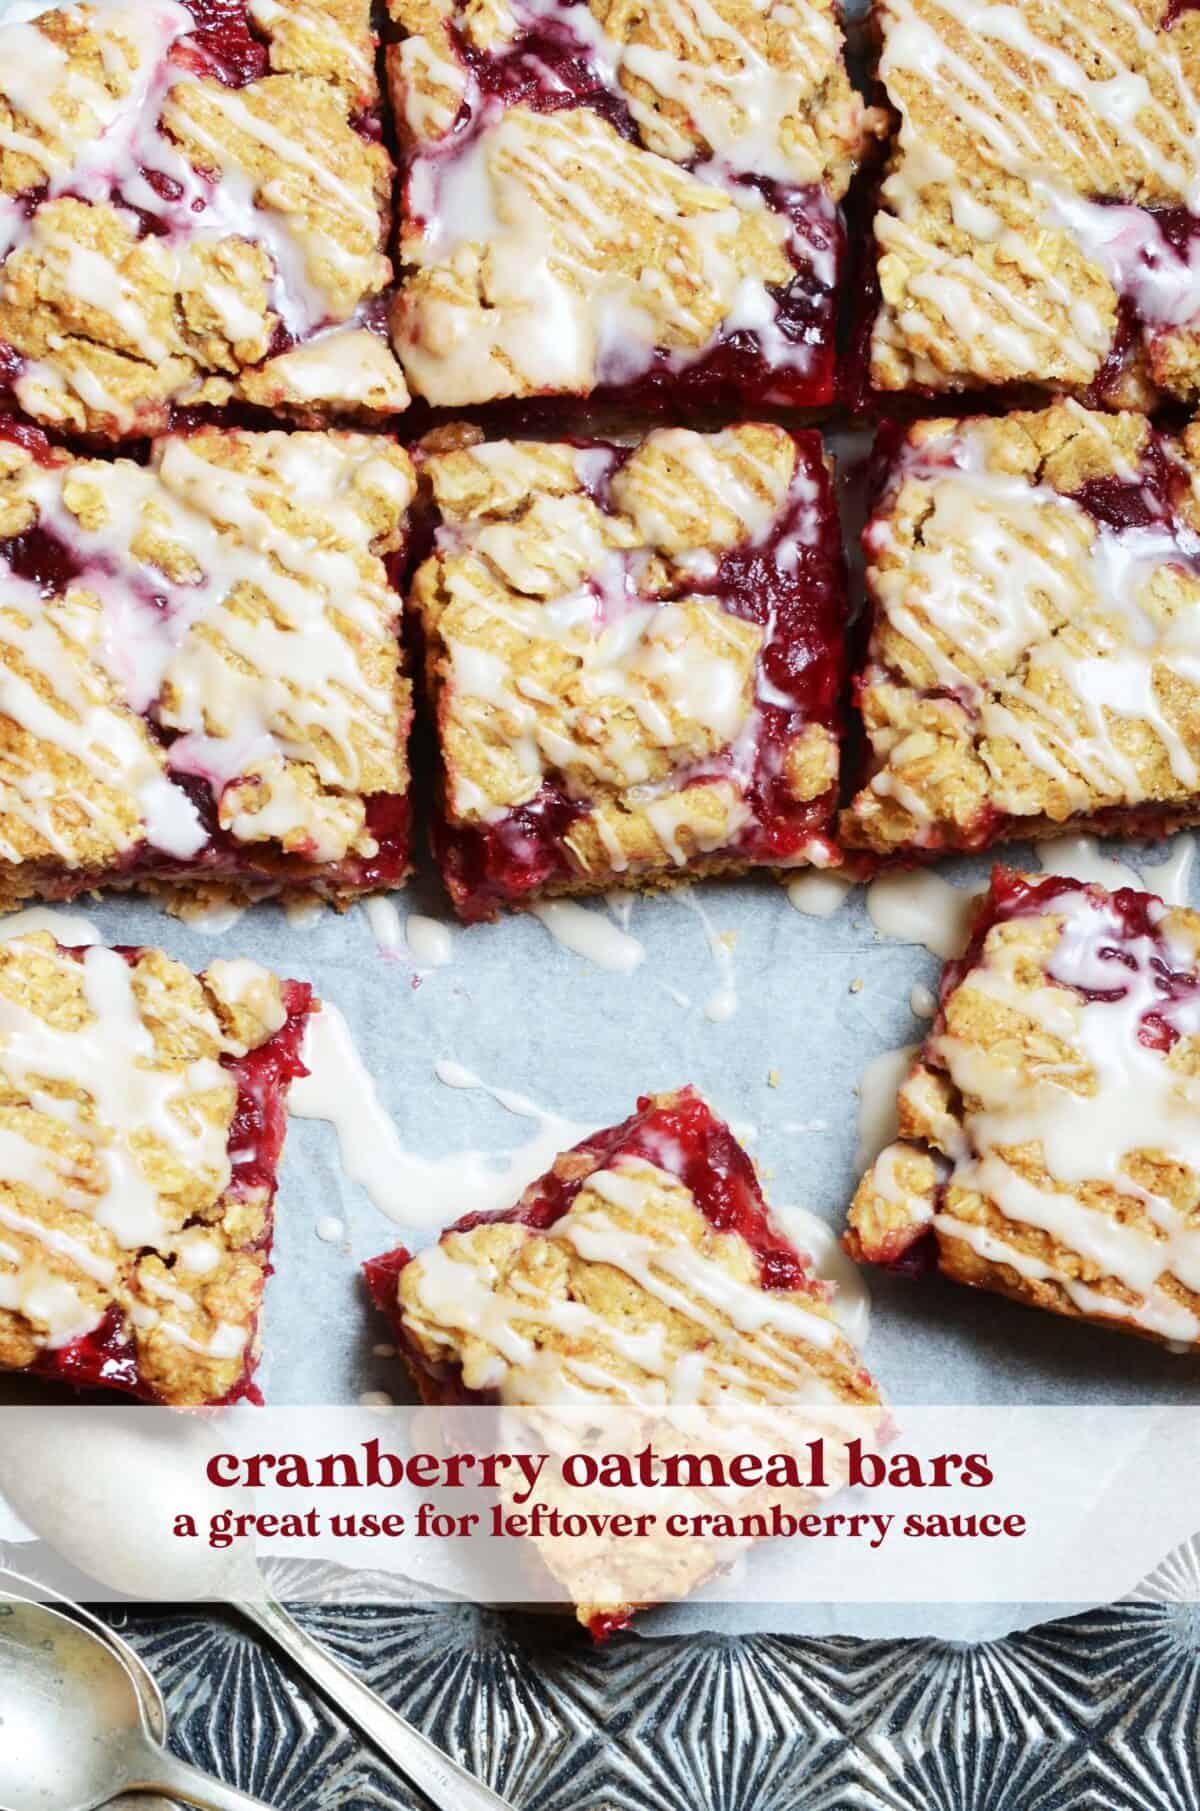 cranberry oatmeal bars recipe graphic